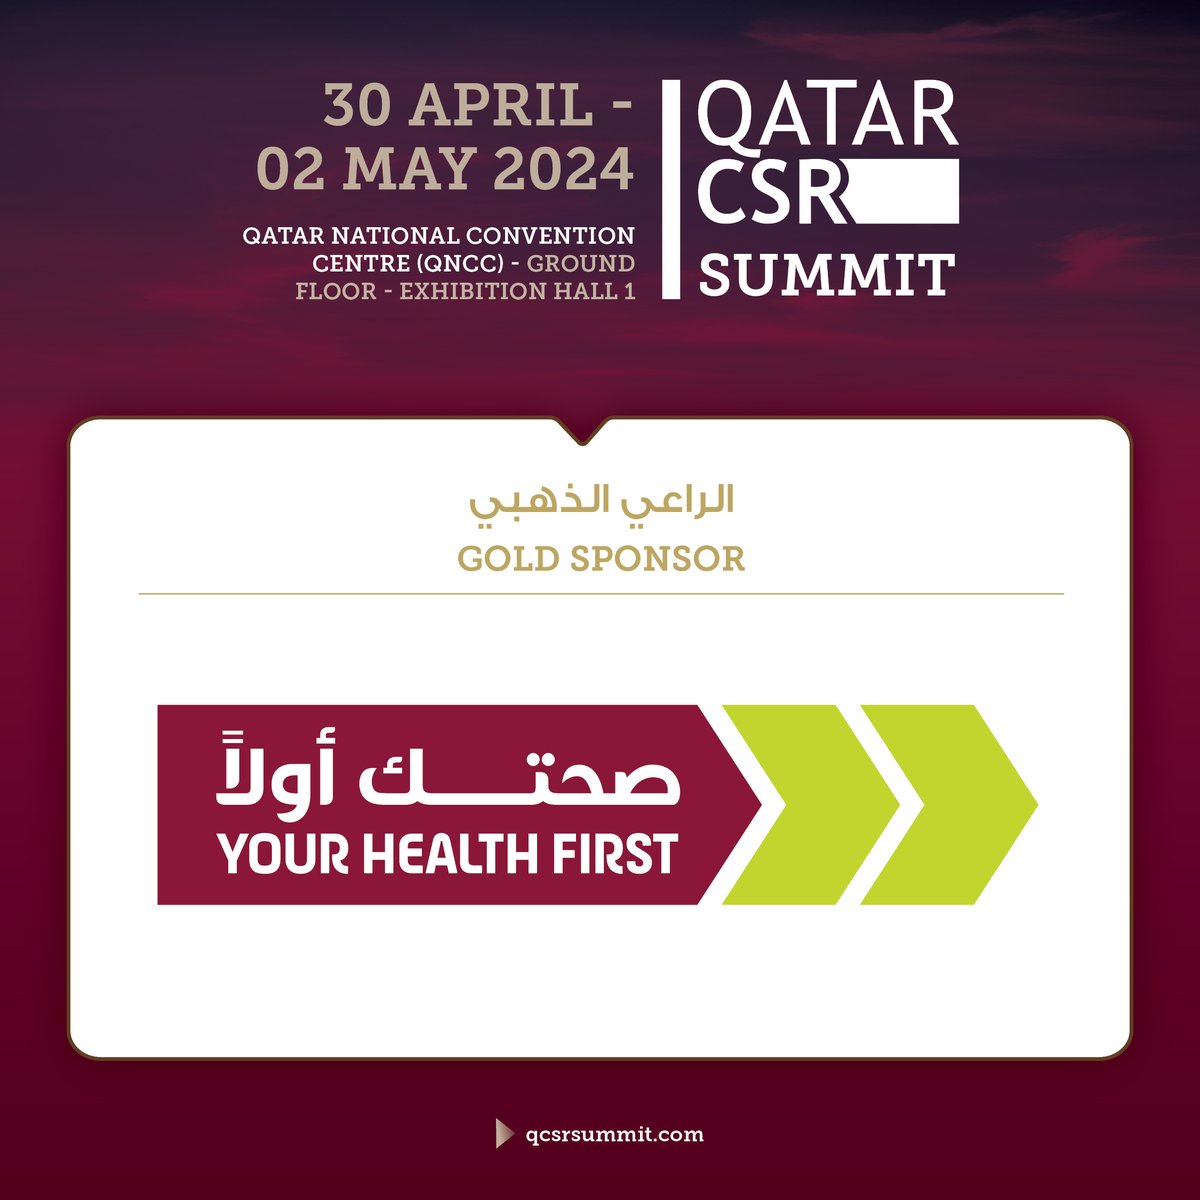 The QCSR Summit is pleased to announce Sahtak Awalan as a Gold Sponsor. Sahtak Awalan - Your Health First, the flagship public health campaign of Weill Cornell Medicine-Qatar (WCM-Q), was launched in 2012 to promote healthy lifestyle behaviors, such as taking regular exercise,